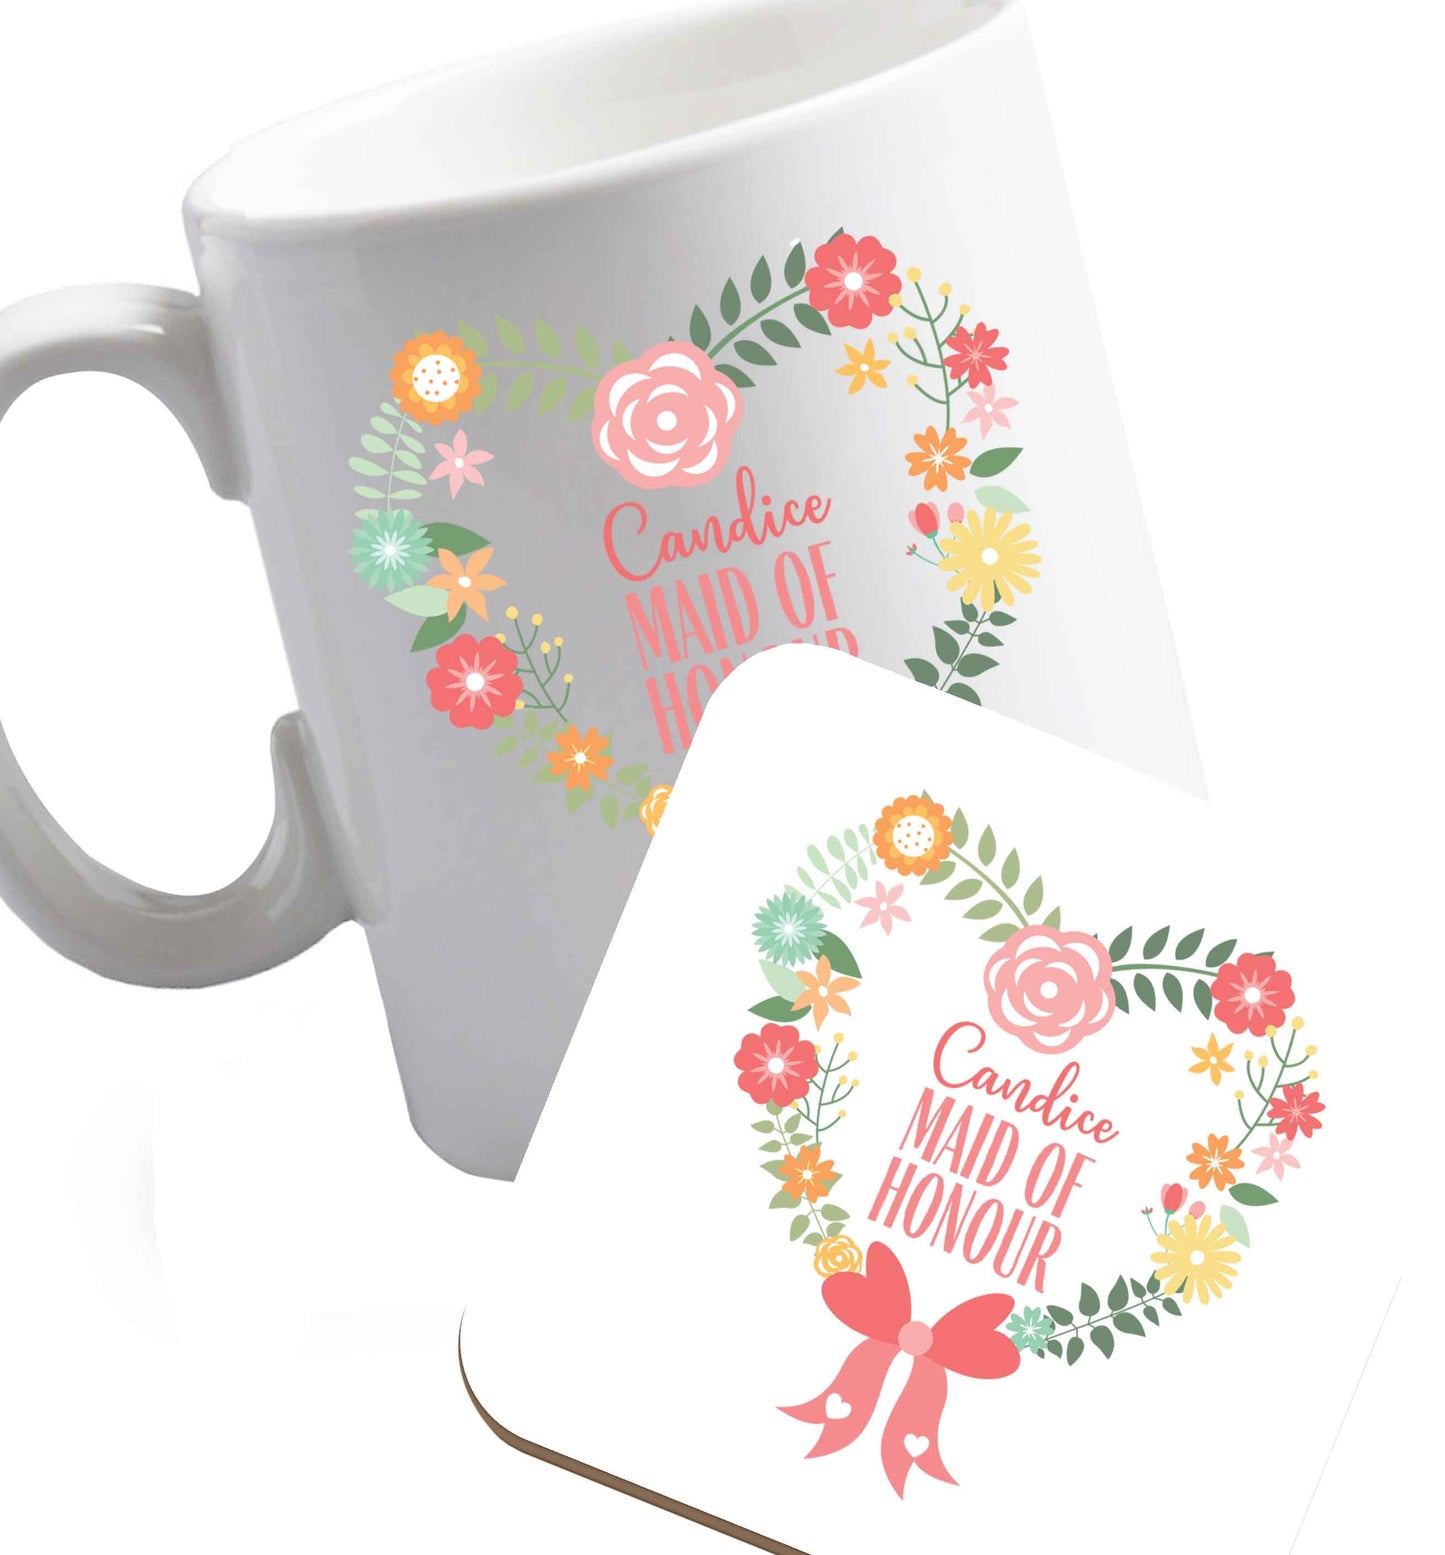 10 oz Perfect wedding guest favours or hen party gifts! Personalised bridal floral wreath designs, any name, any role!   ceramic mug and coaster set right handed